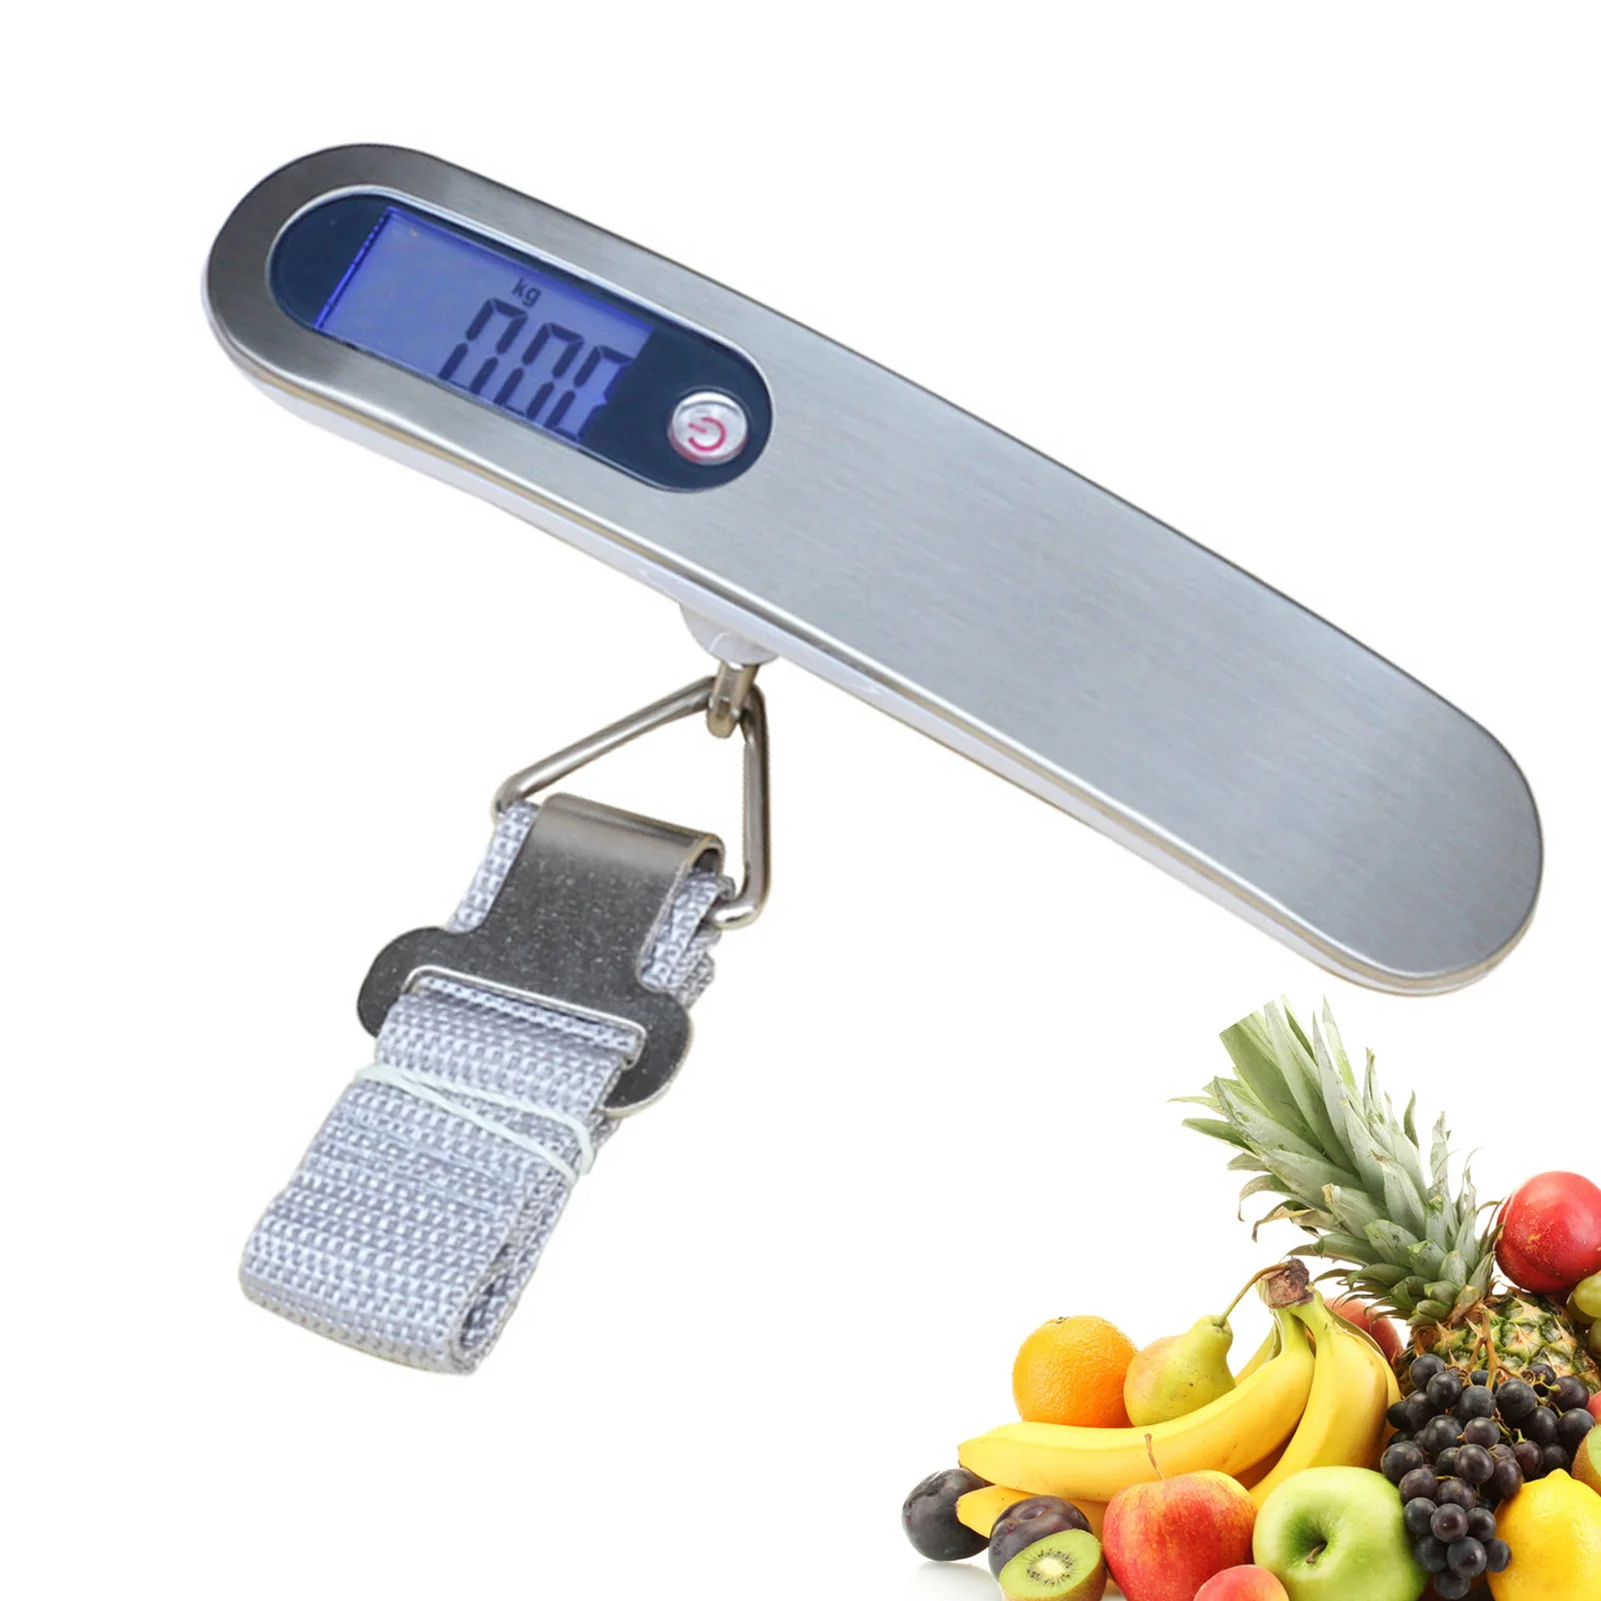 

Luggage Scale Scale For Travel Portable Handheld Suitcase Weight Digitial LCD Display Backlight Baggage Scale